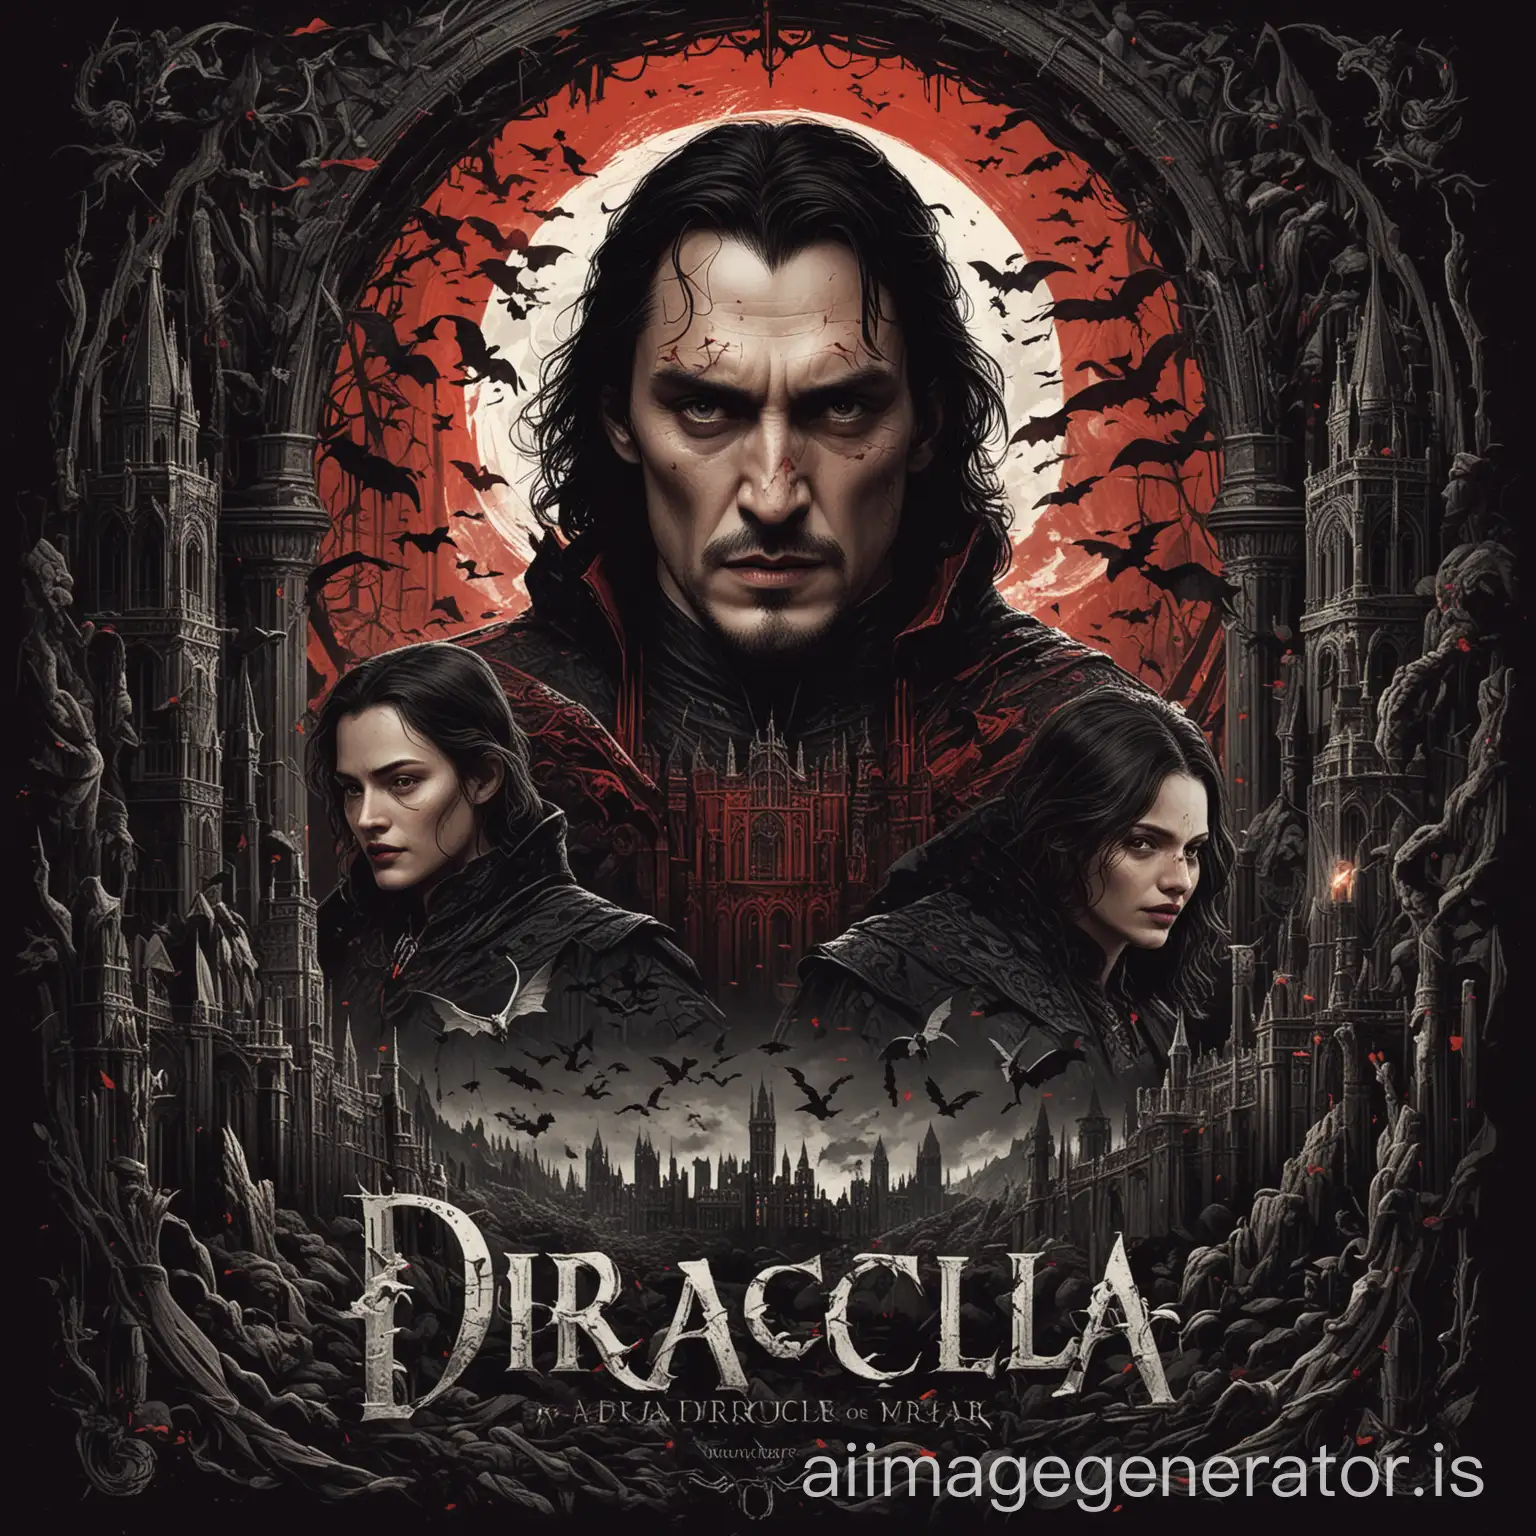  design inspired by the dark and mysterious world of Dracula Untold. Let our AI platform bring favorite movie to life with stunning vector graphics and intricate details."